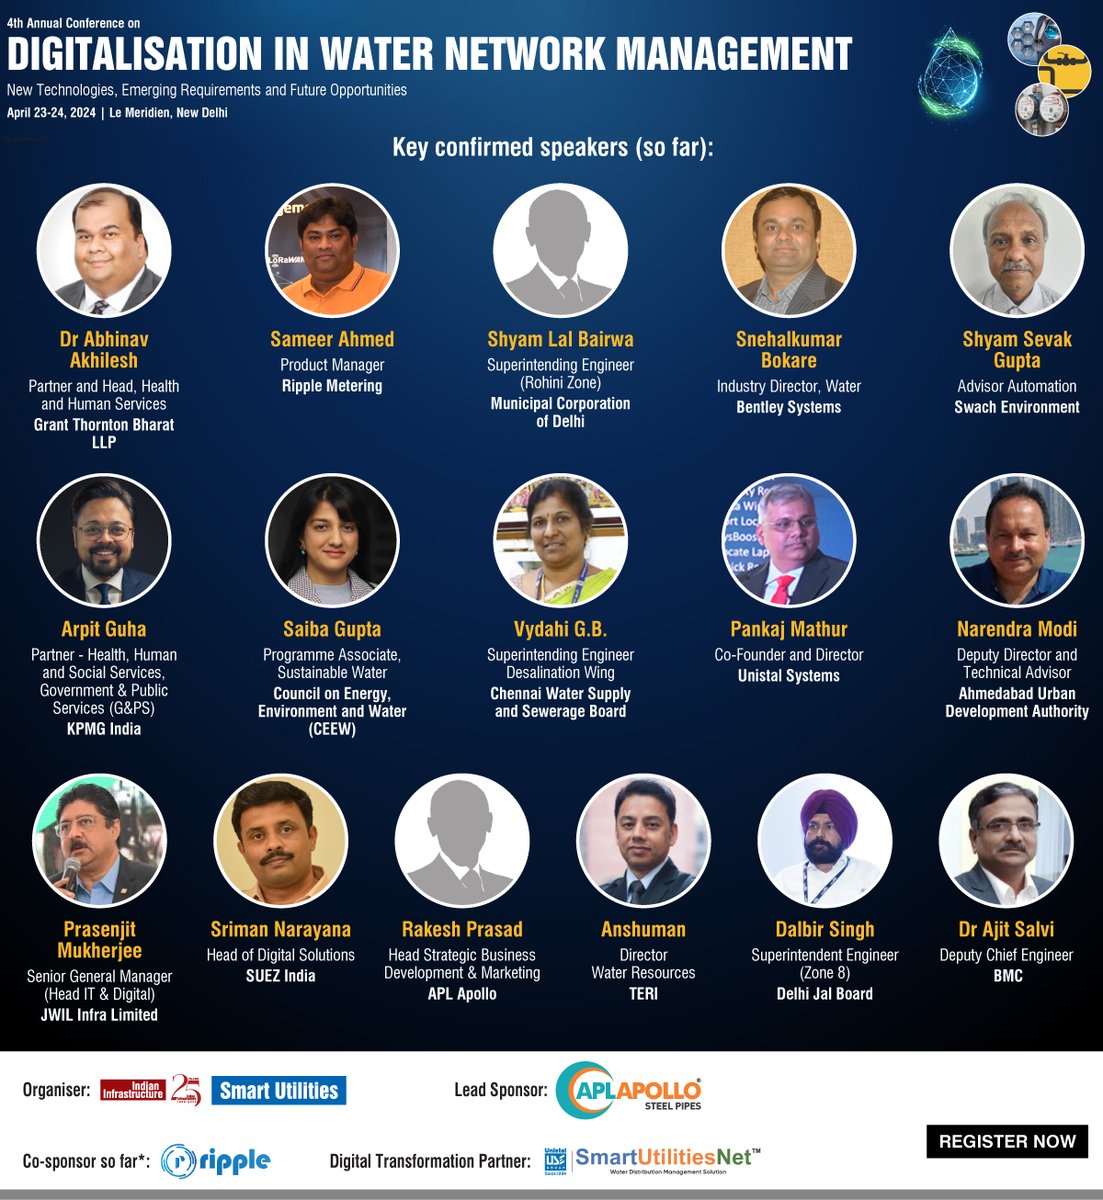 Join us for our 4th annual conference on Digitalisation of Water Network Management, scheduled for April 23-24, 2024 at Le Meridien, New Delhi.

To confirm your slot, register now: web.cvent.com/event/88f4057b…

#DigitalWater #WaterResilience #OperationalEfficiency #SCADA #IoTinWater